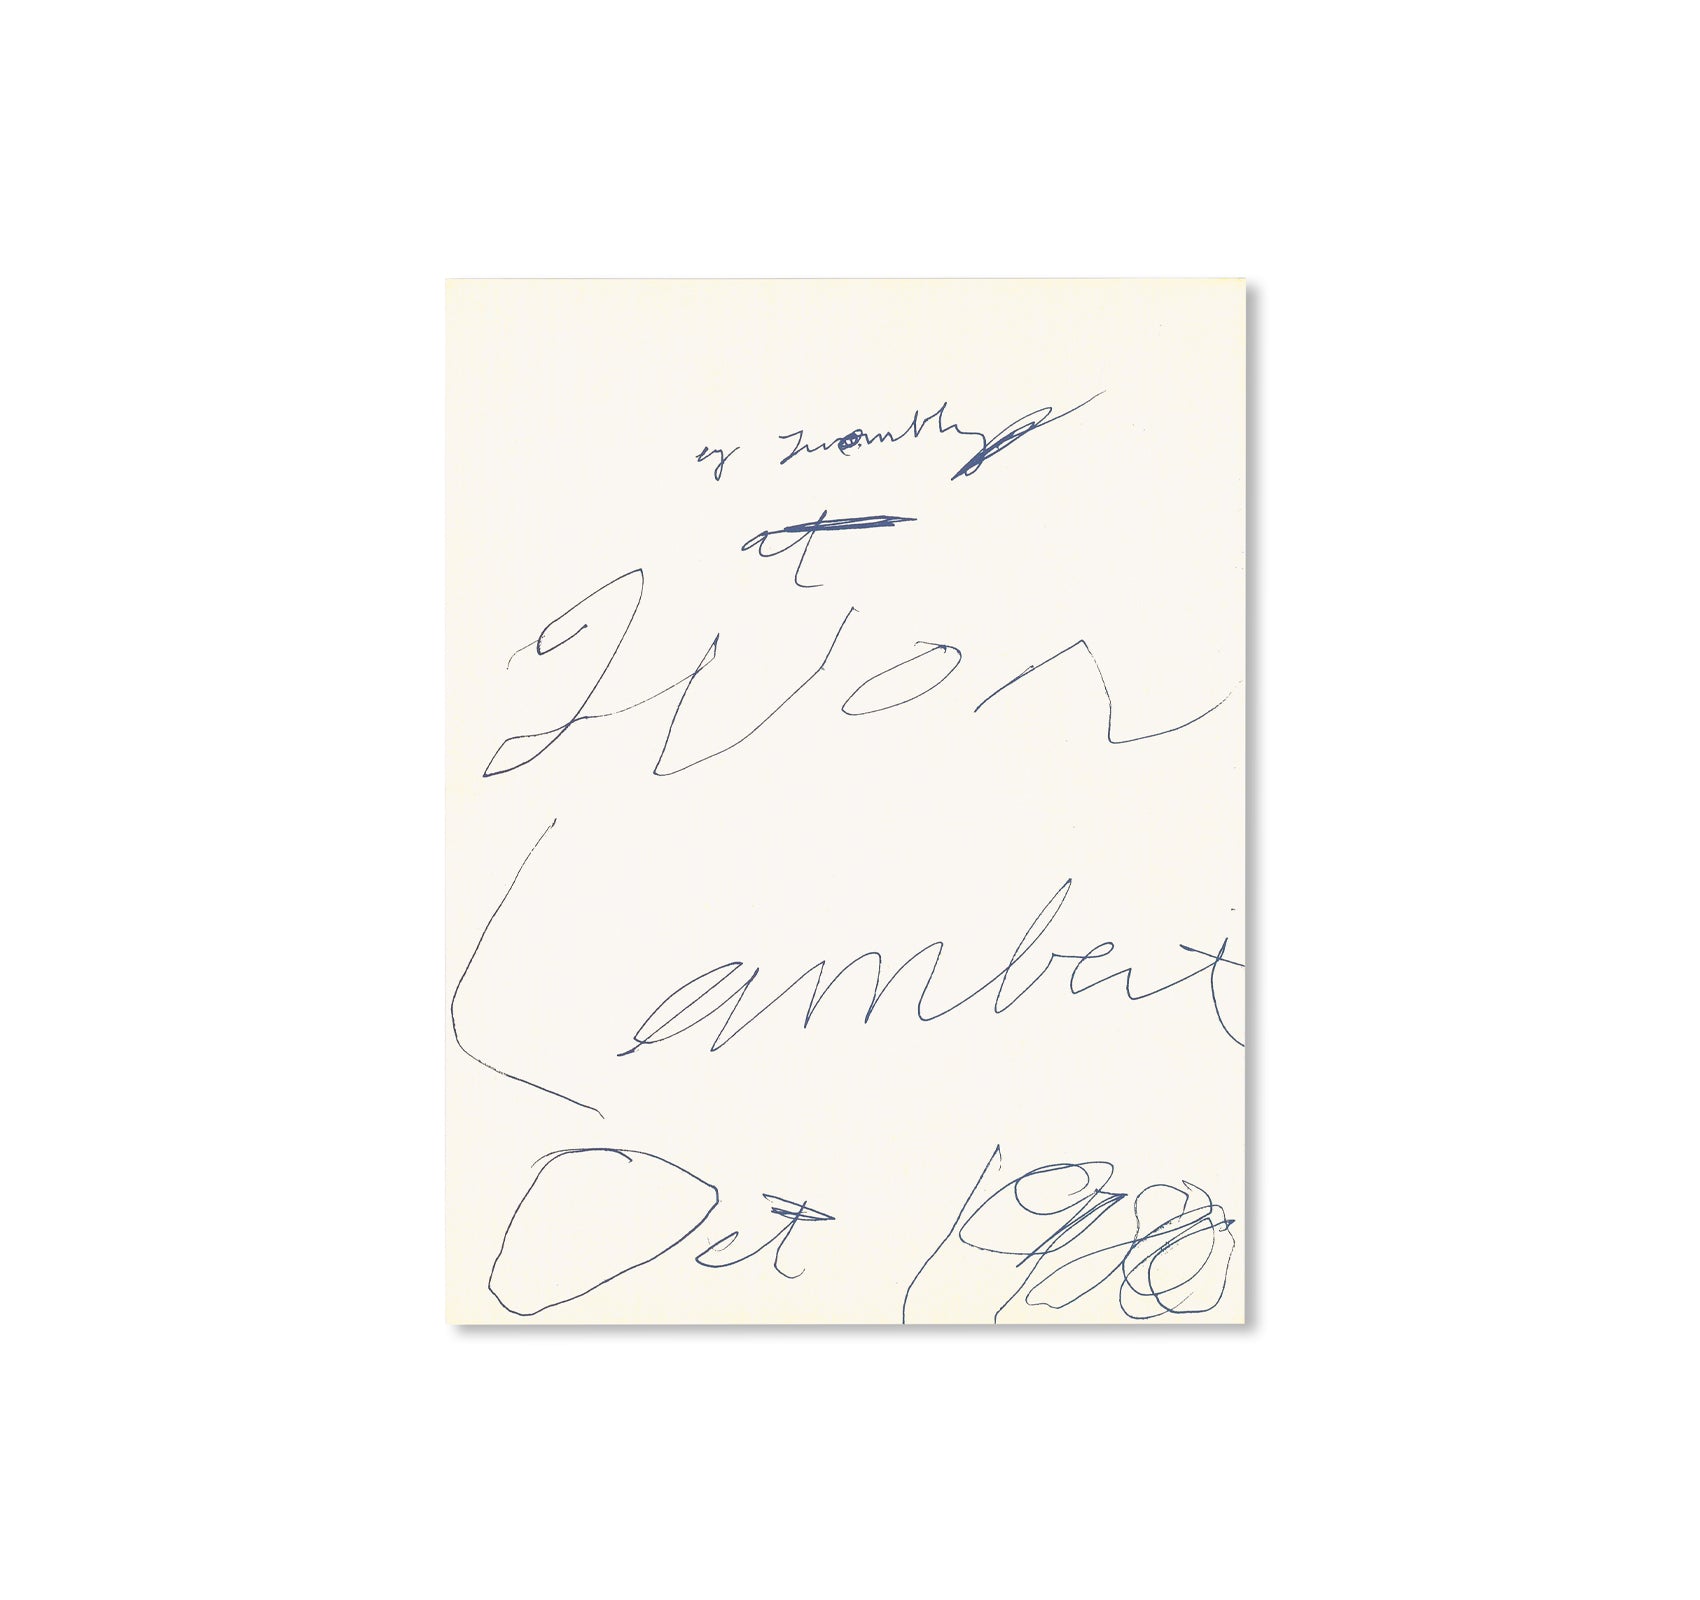 INVITATION PRINT 1980 by Cy Twombly